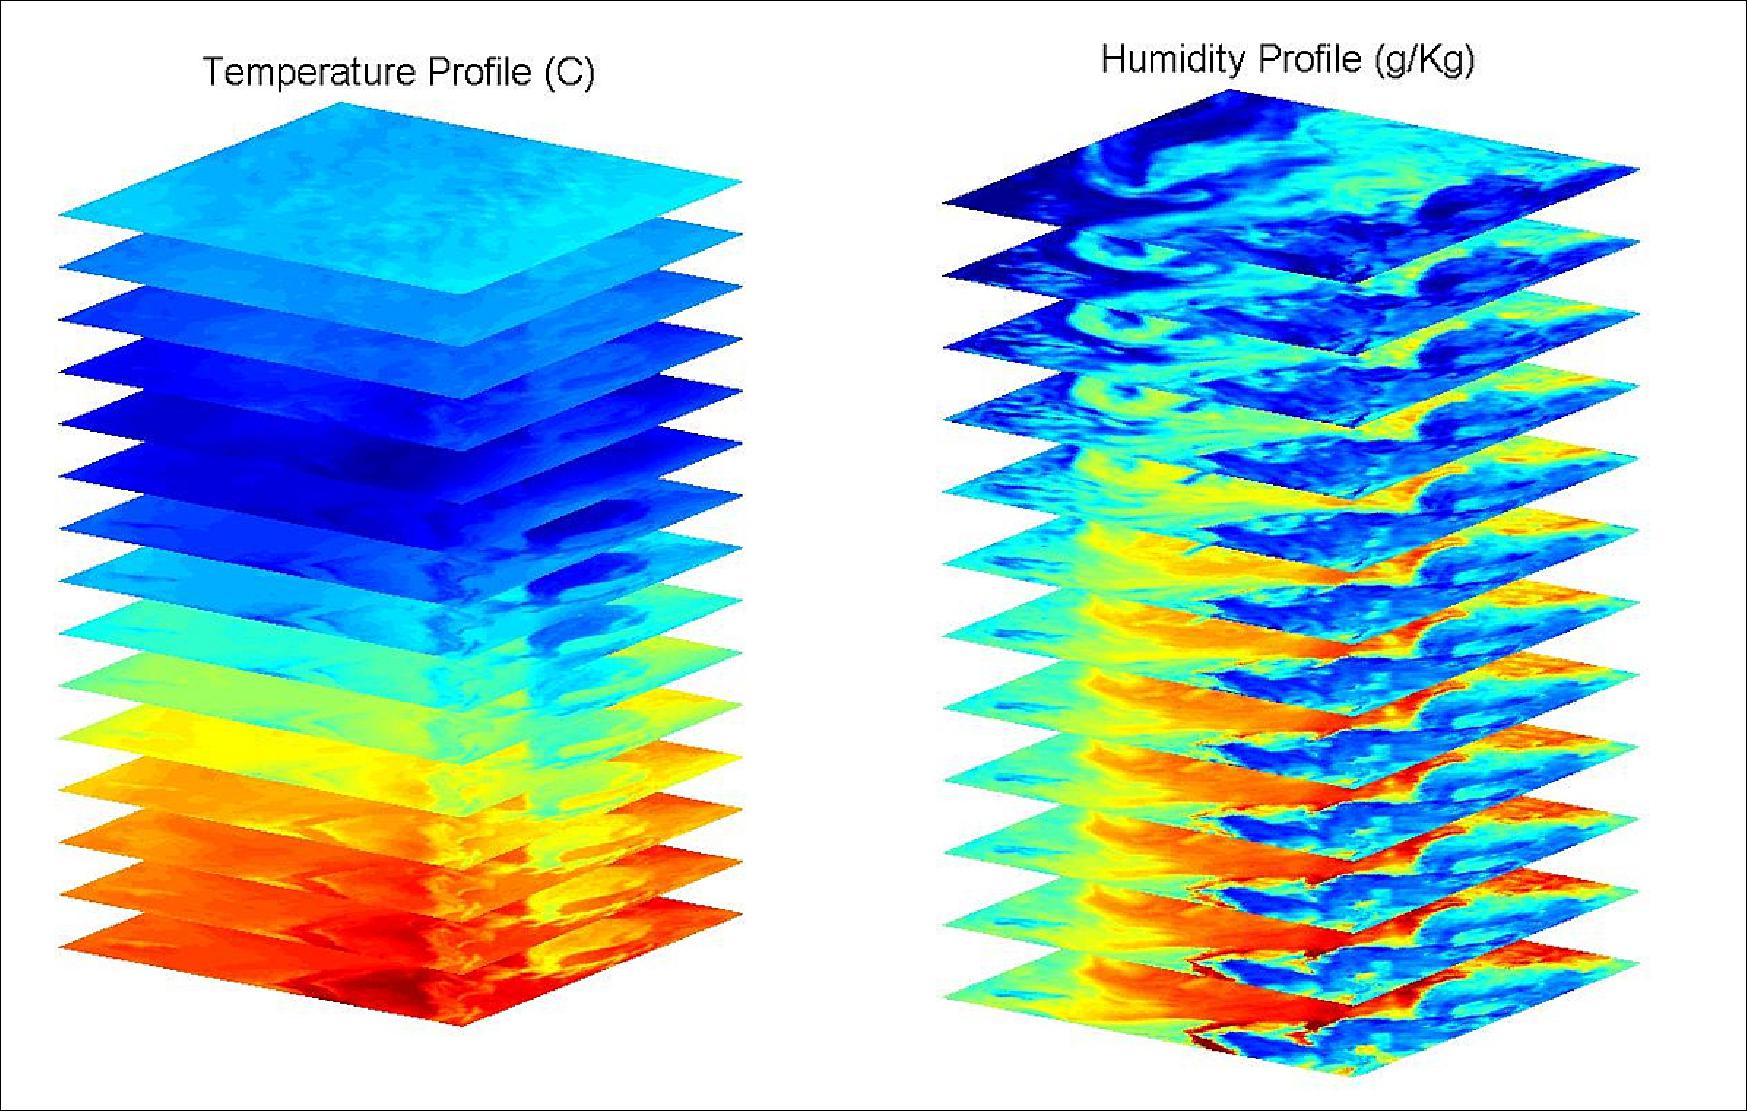 Figure 17: Sounder generated vertical atmospheric profiles of temperature and humidity (image credit: ISRO)